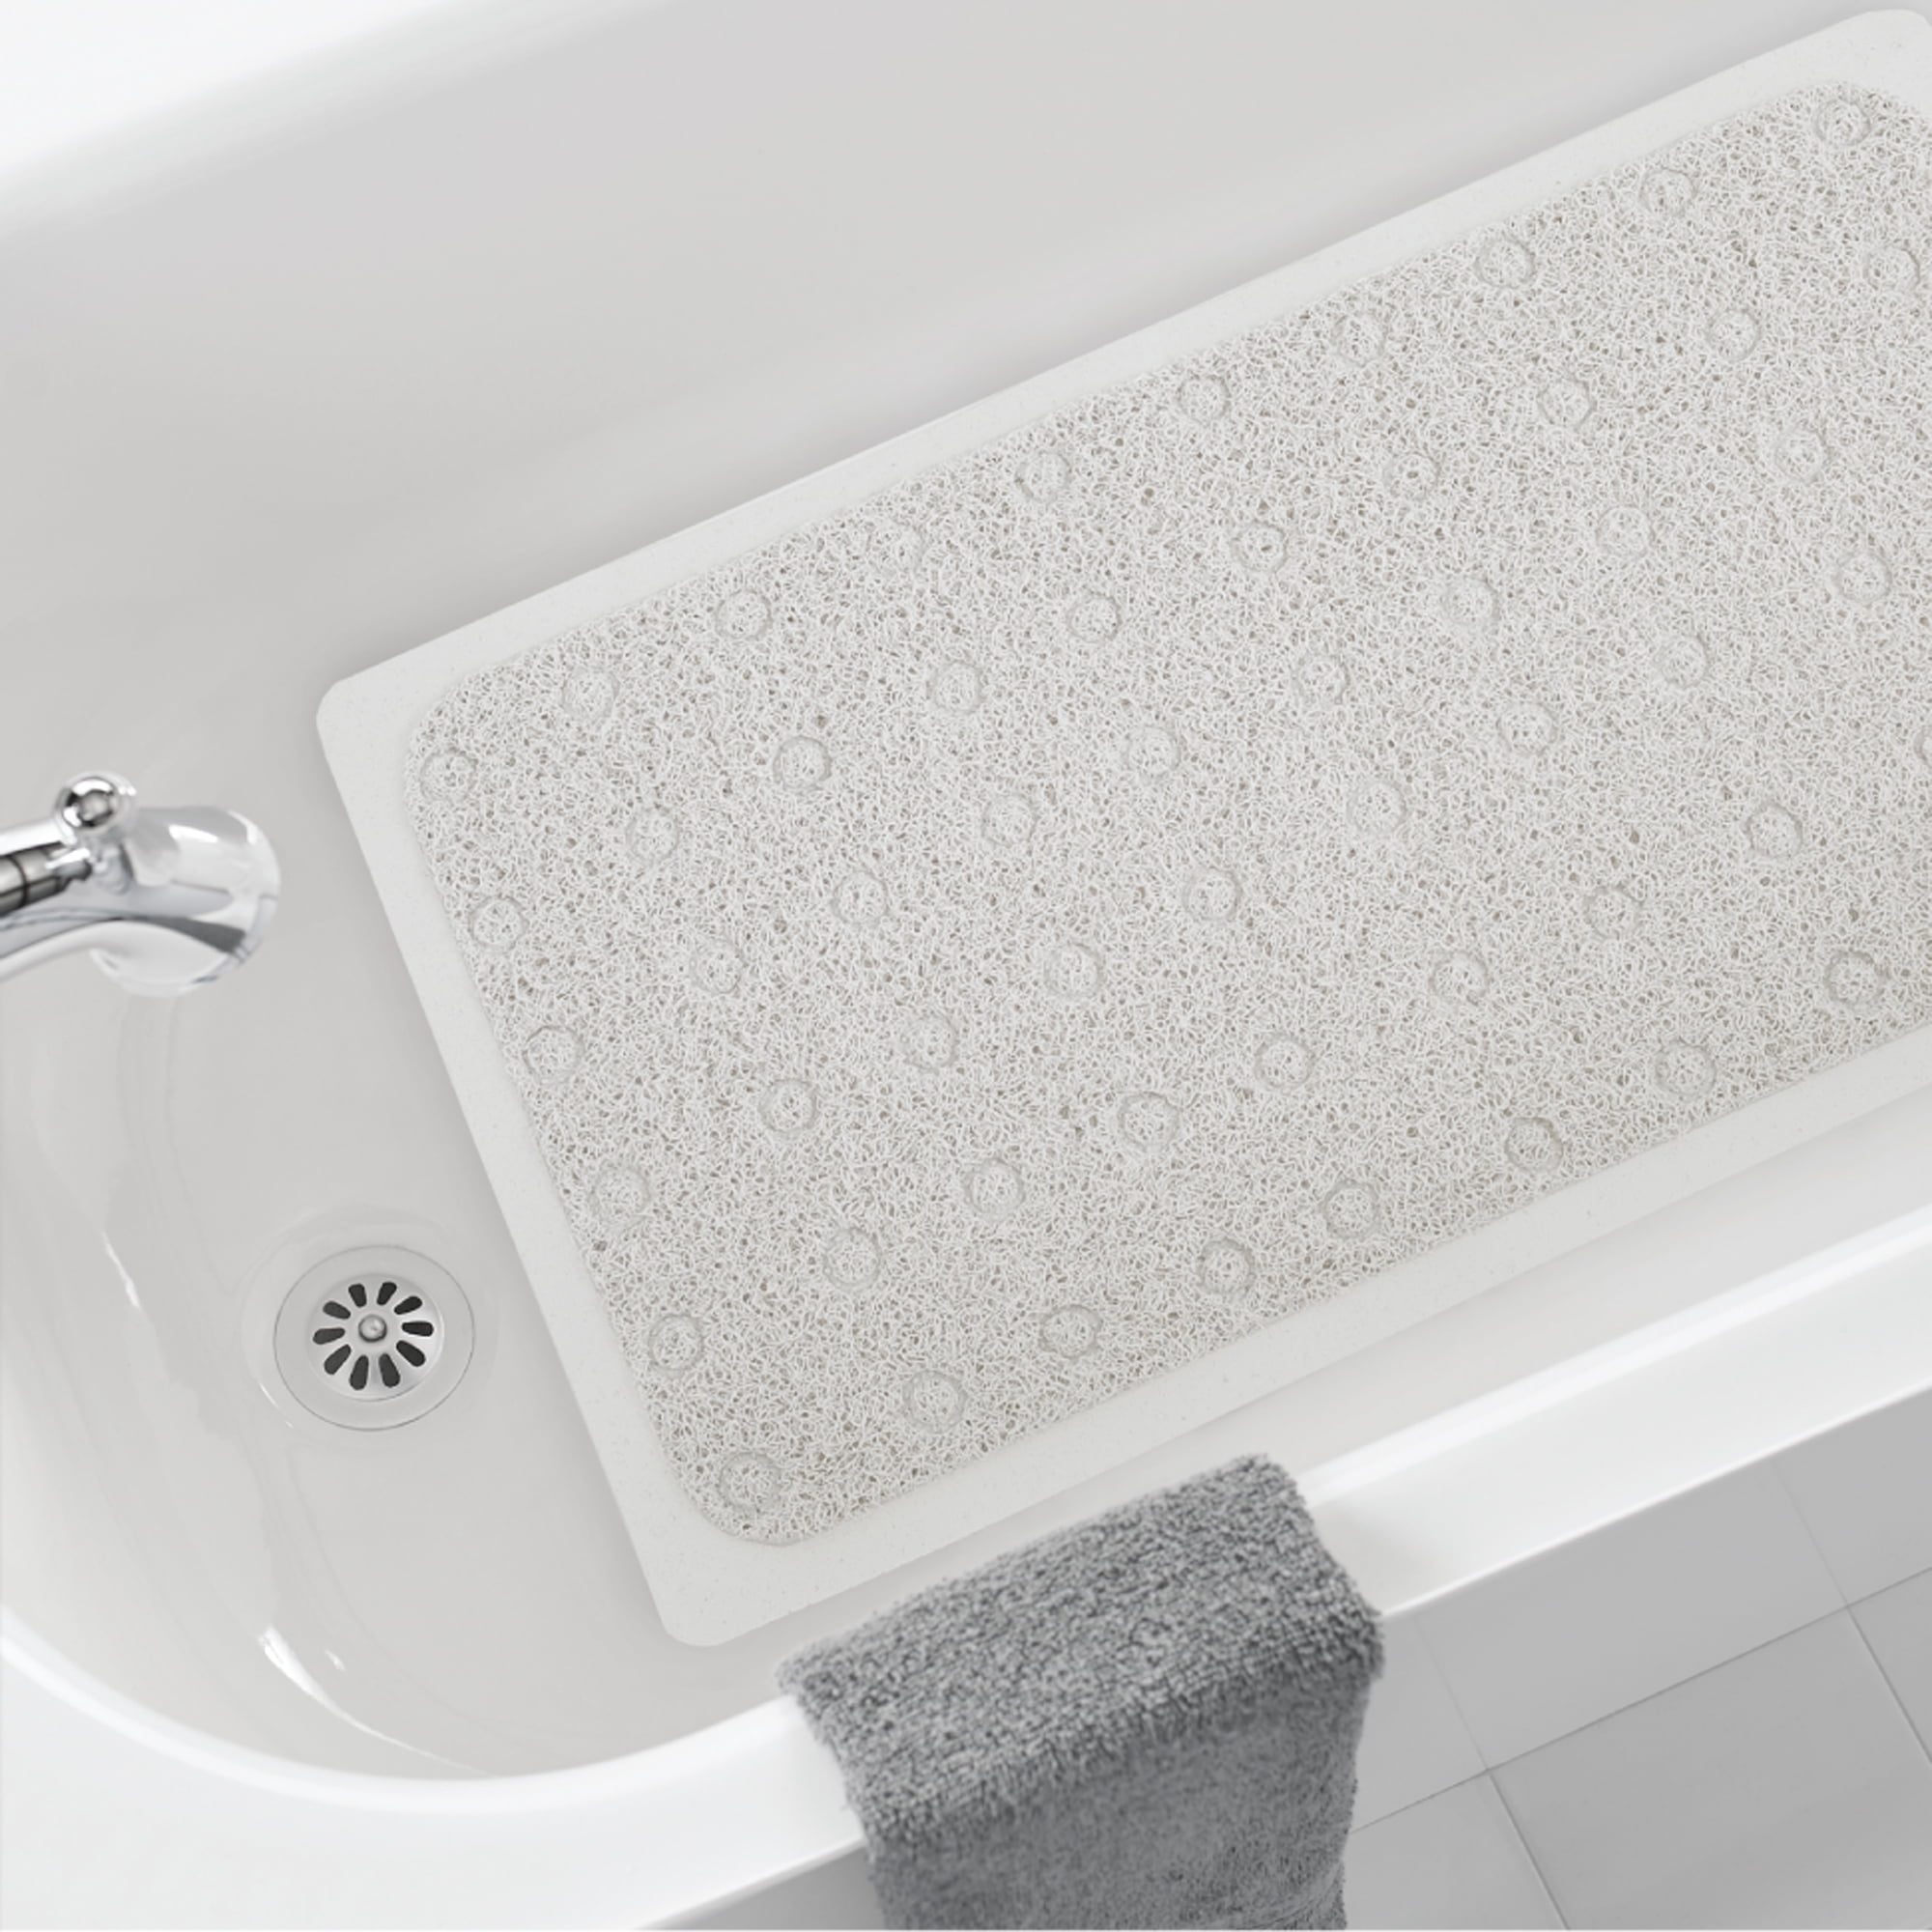 Maytex Ultimate Loofah Tub Mat, Color: White - JCPenney